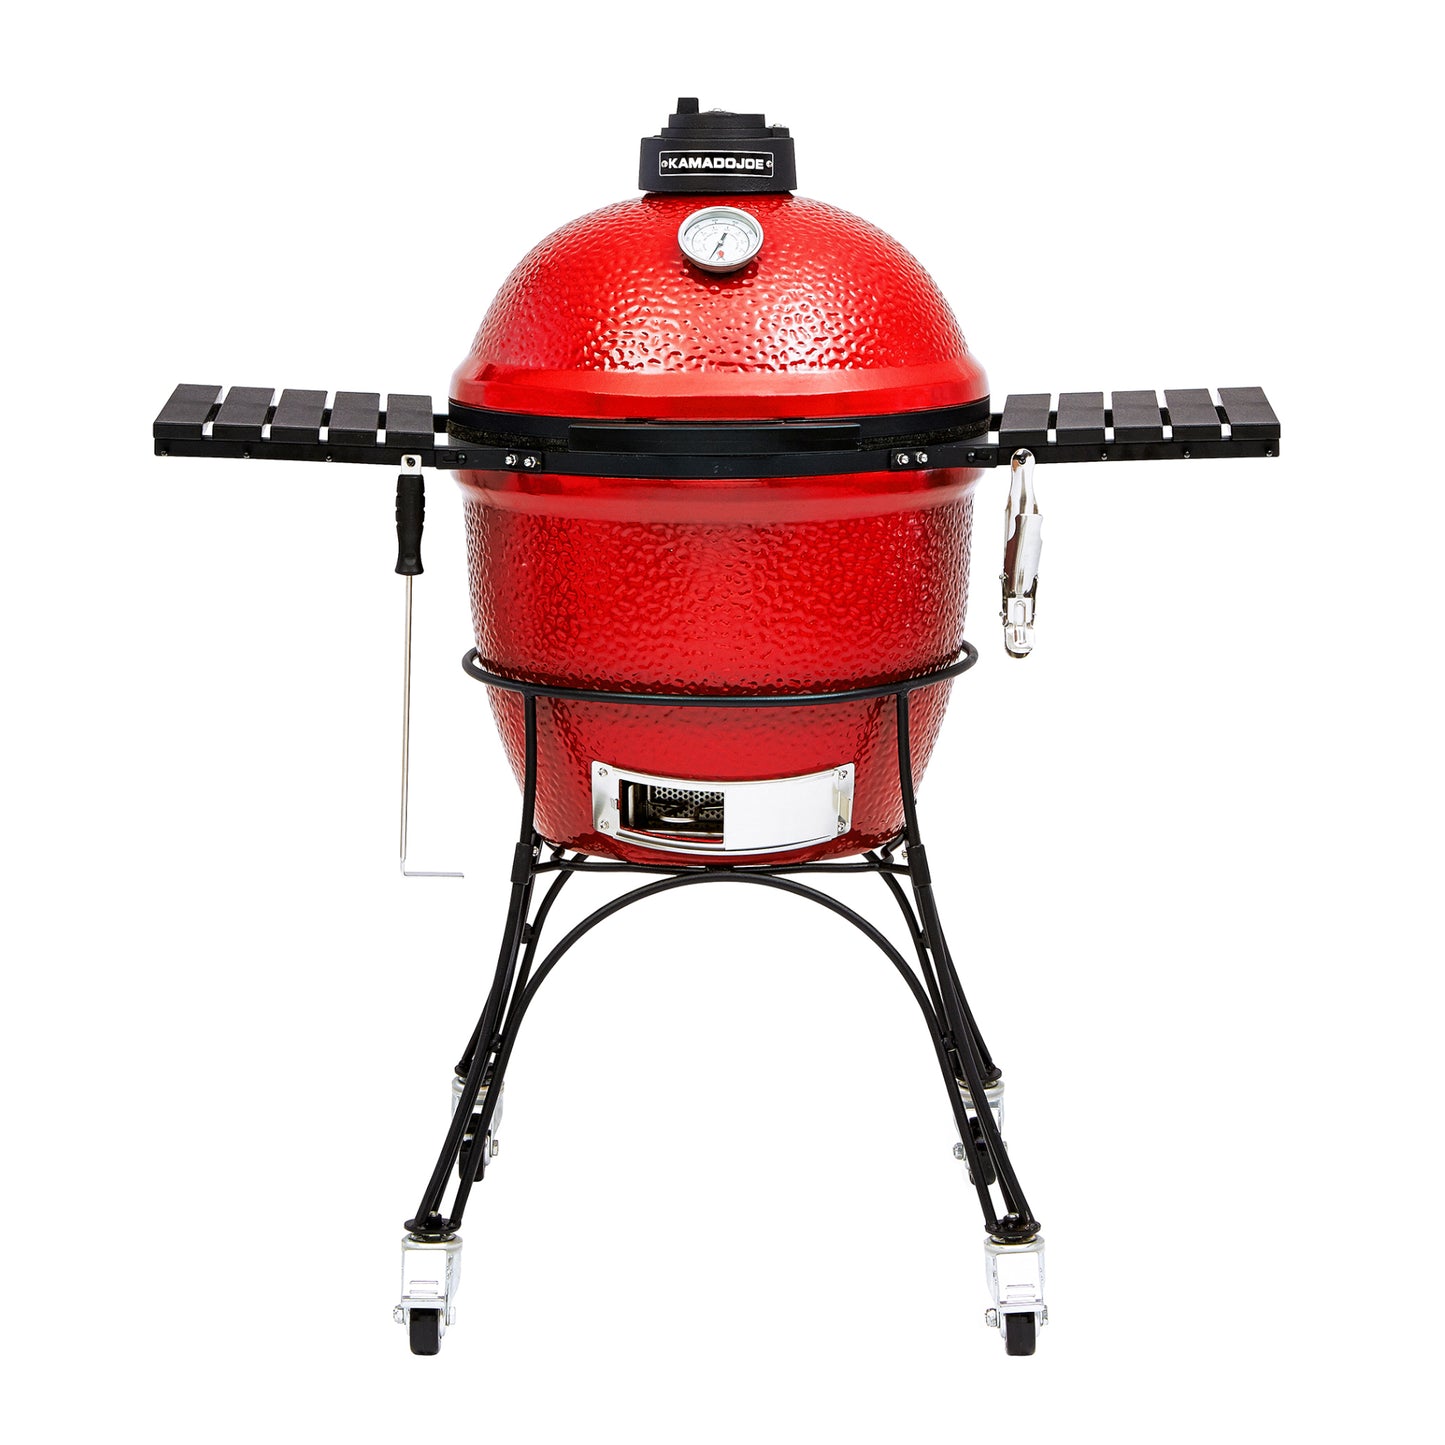 Small red barbecue